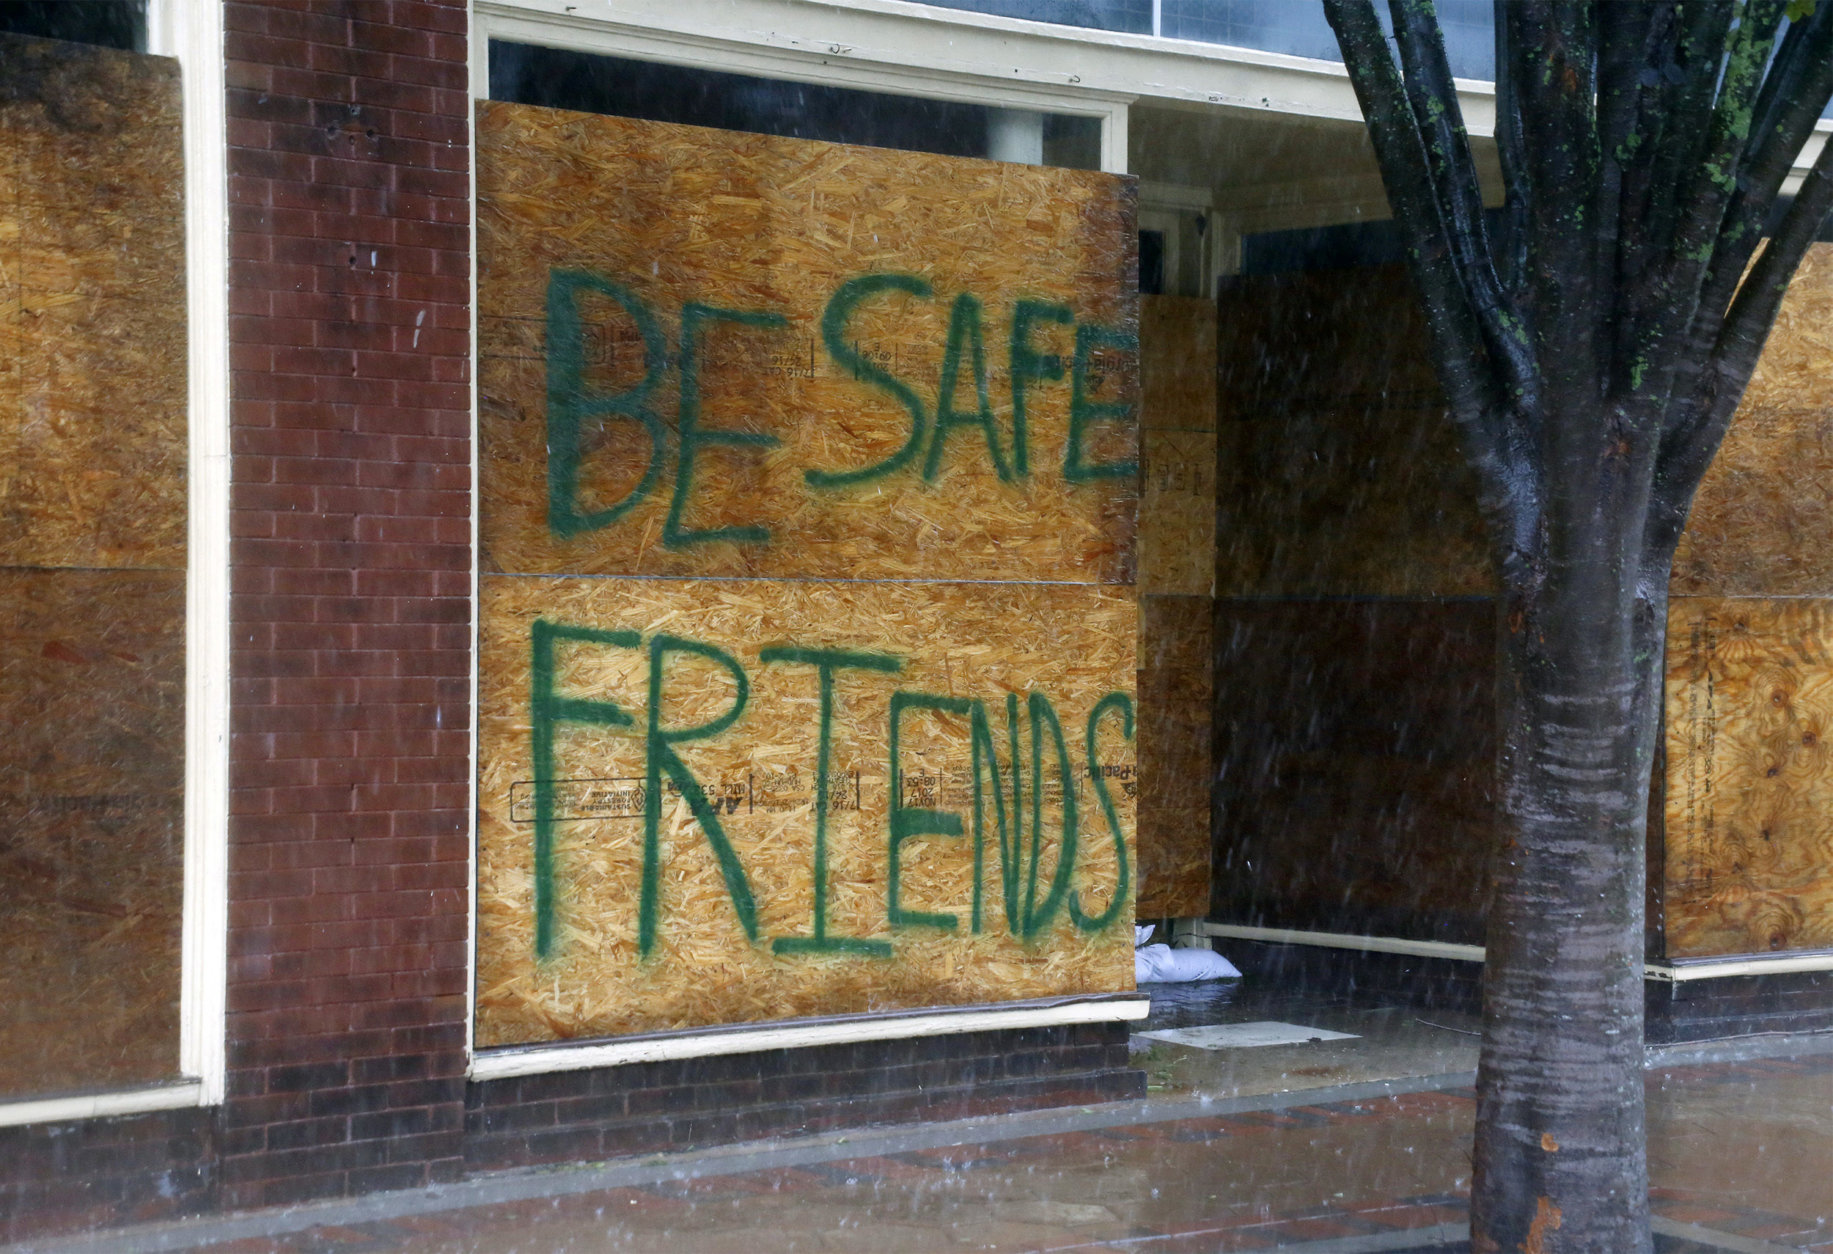 A message on a boarded-up business encourages people to be safe as Hurricane Florence hits downtown New Bern, N.C., on Friday, Sept. 14, 2018. (AP Photo/Chris Seward)